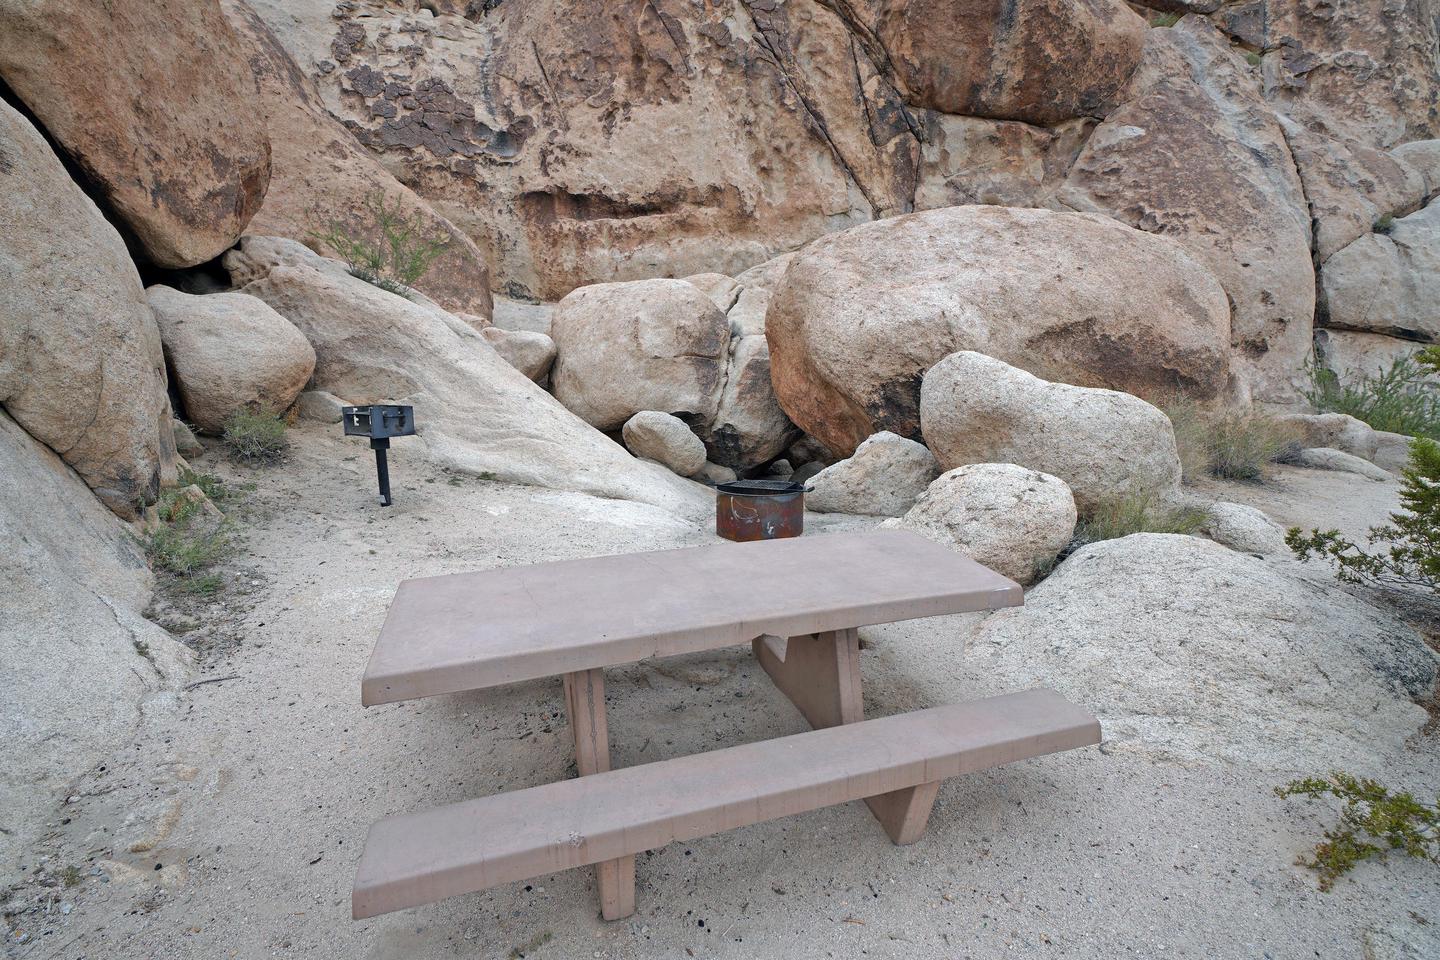 Campsite  with picnic table surrounded by boulders .Campsite.